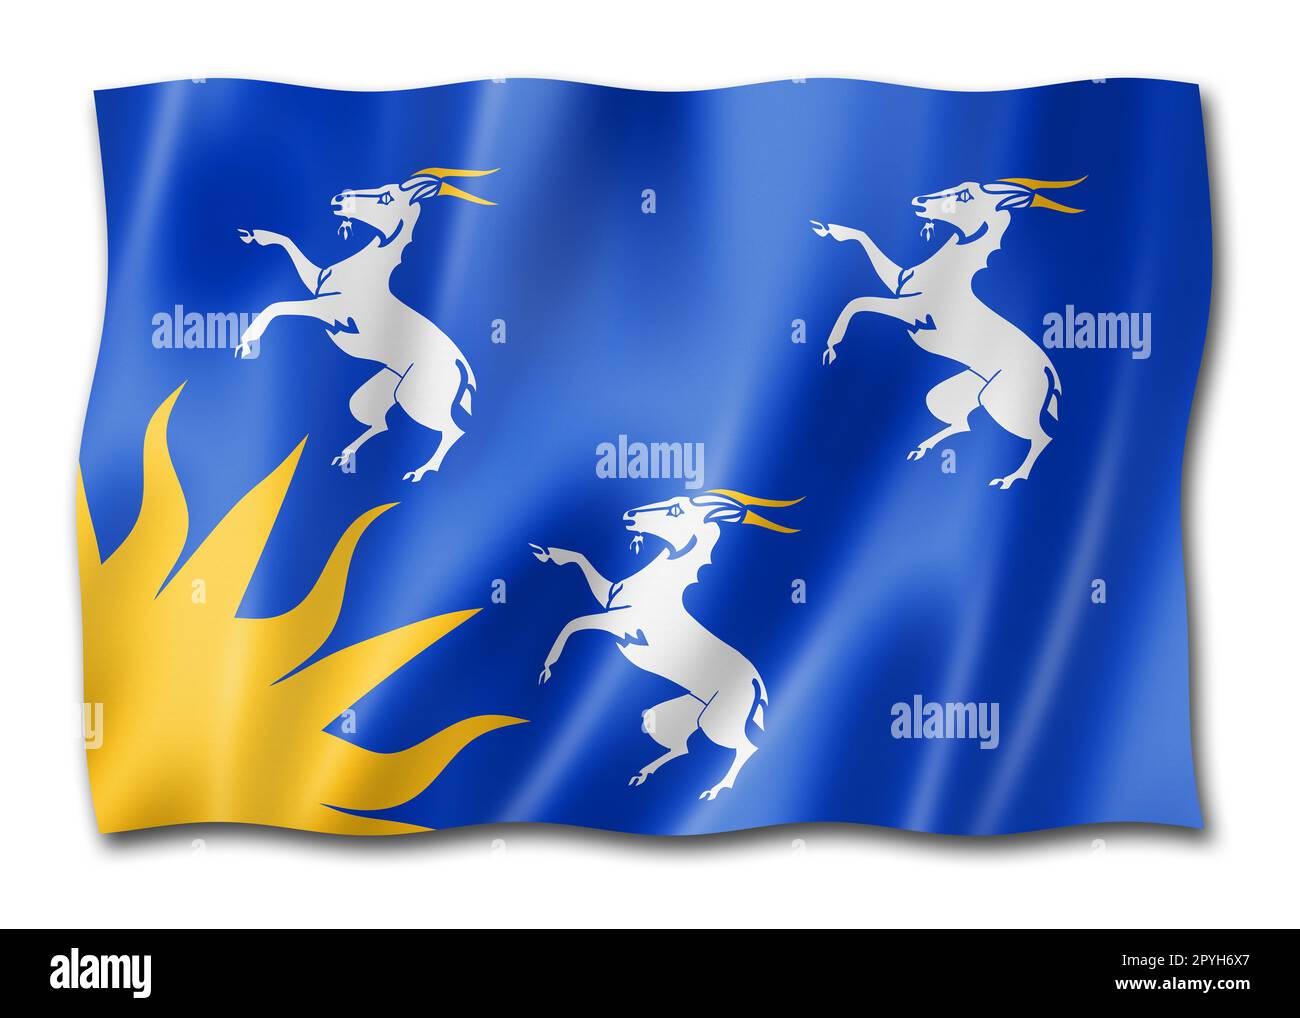 Merionethshire County flag, United Kingdom waving banner collection. 3D illustration Stock Photo